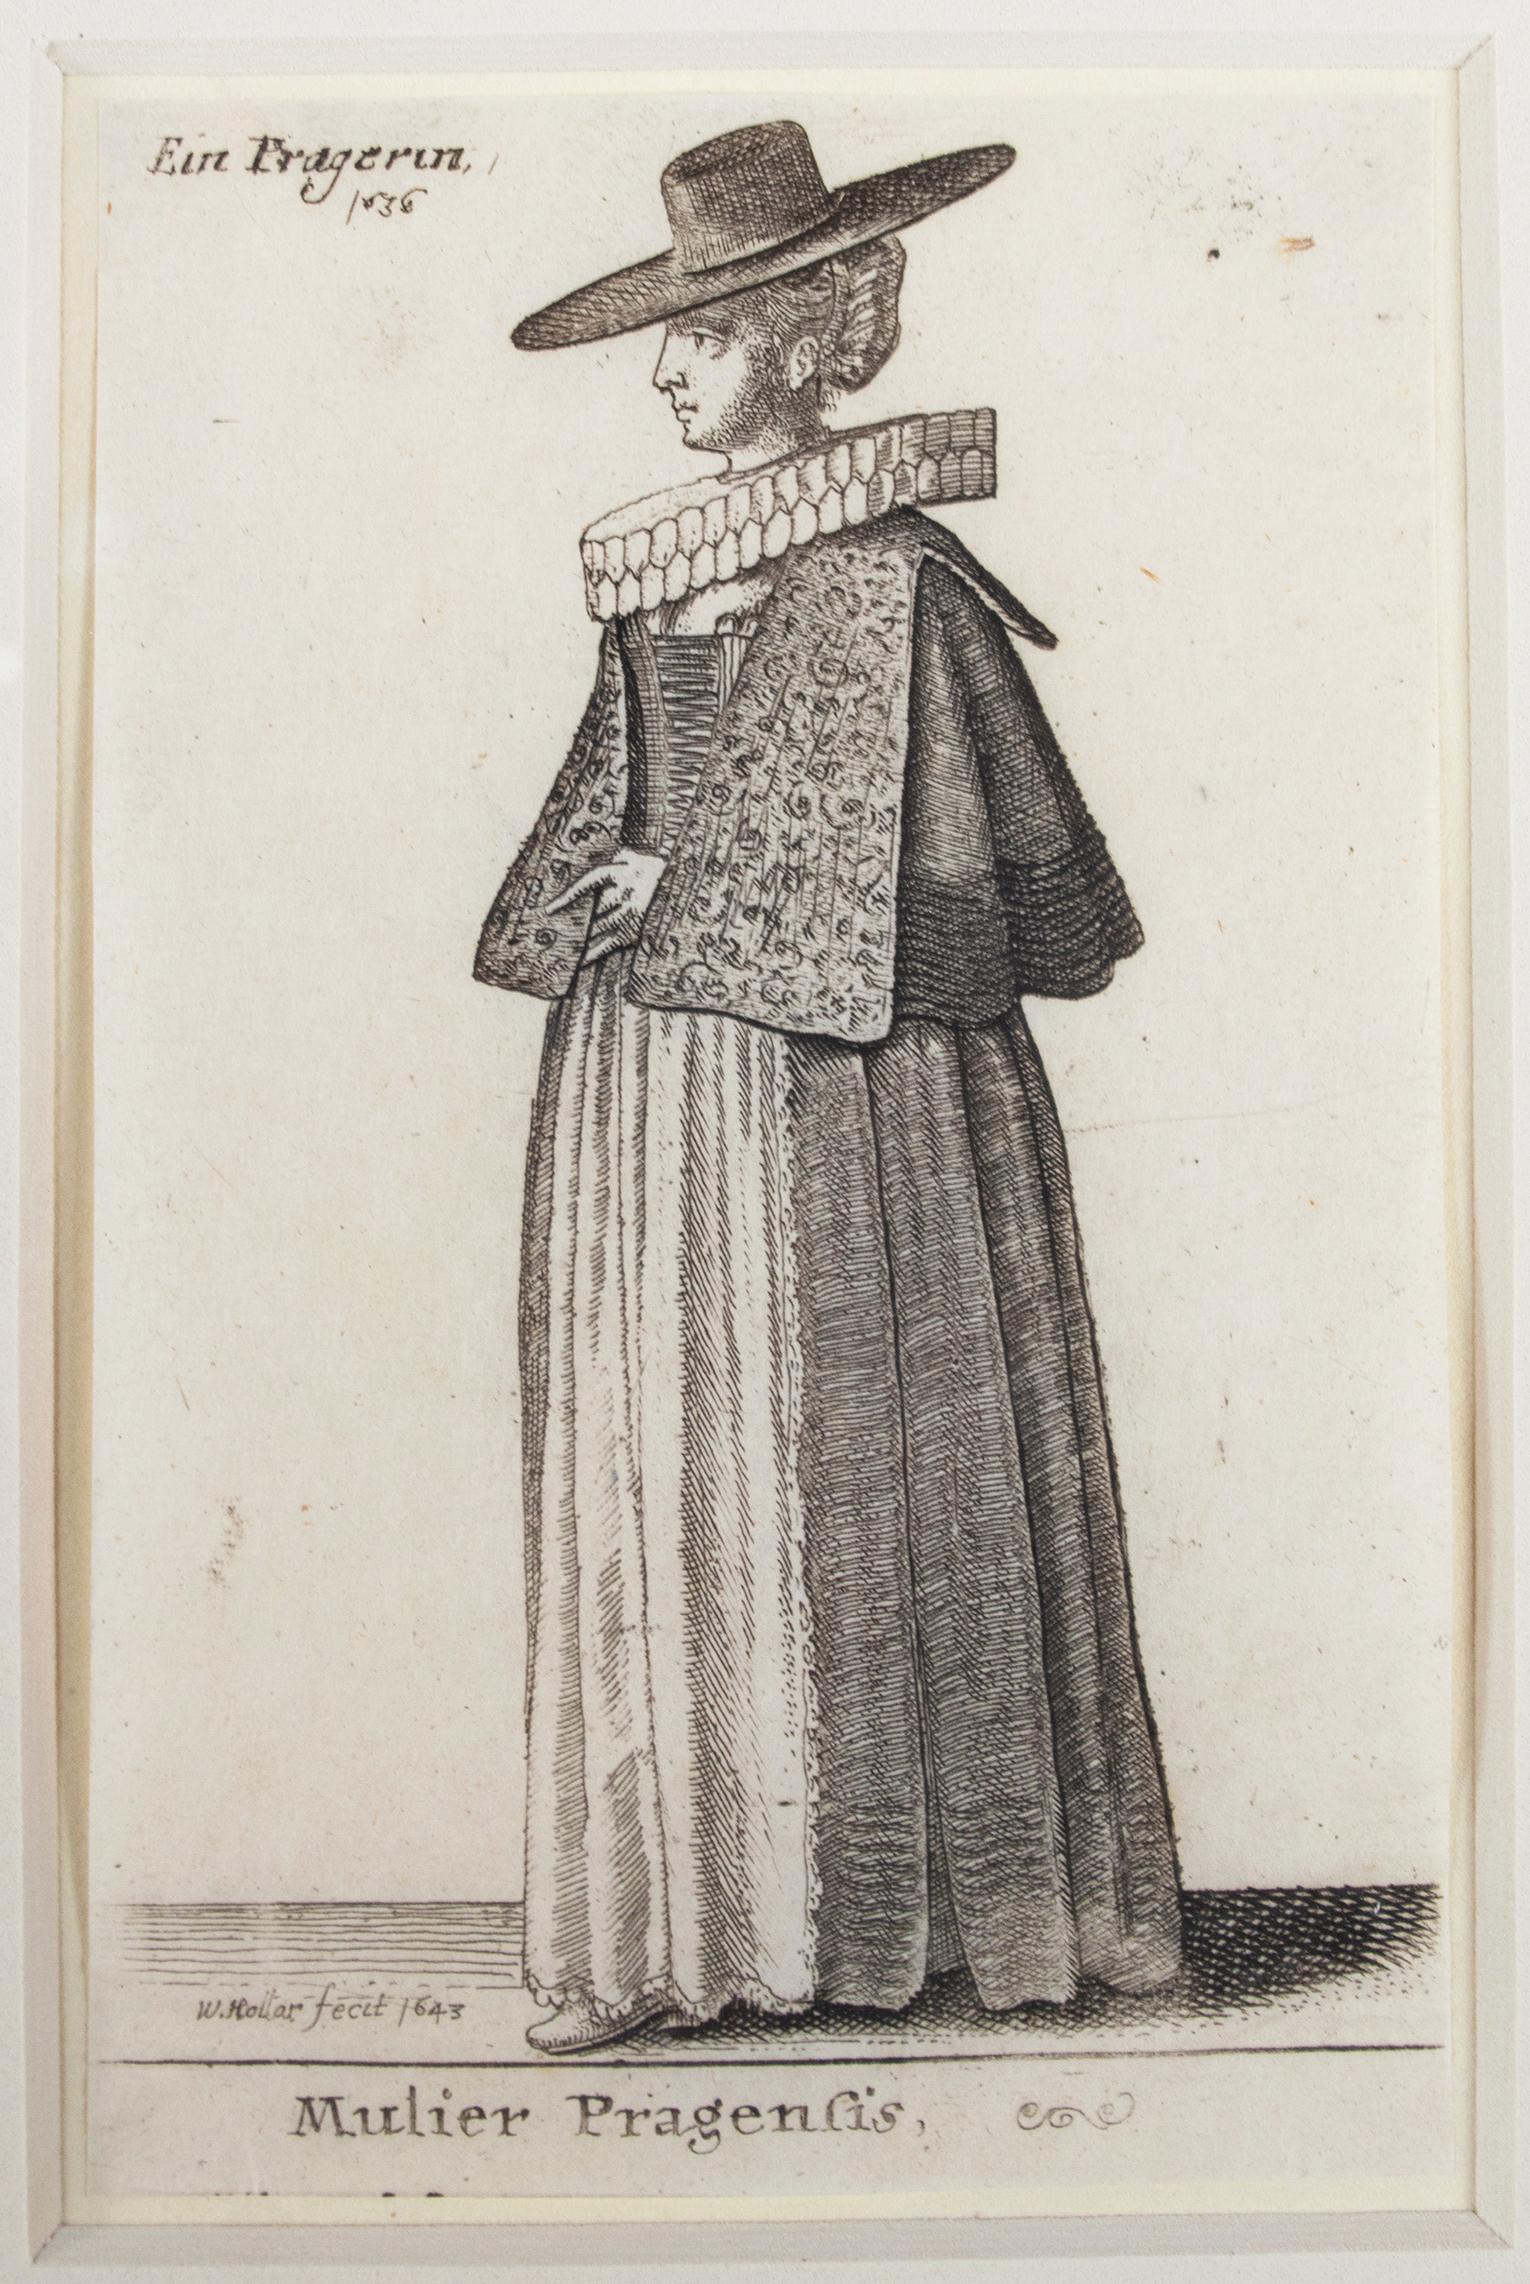 Presented here as a group are four original etchings of women in European national dress from the master printmaker Wenceslaus Hollar's series 